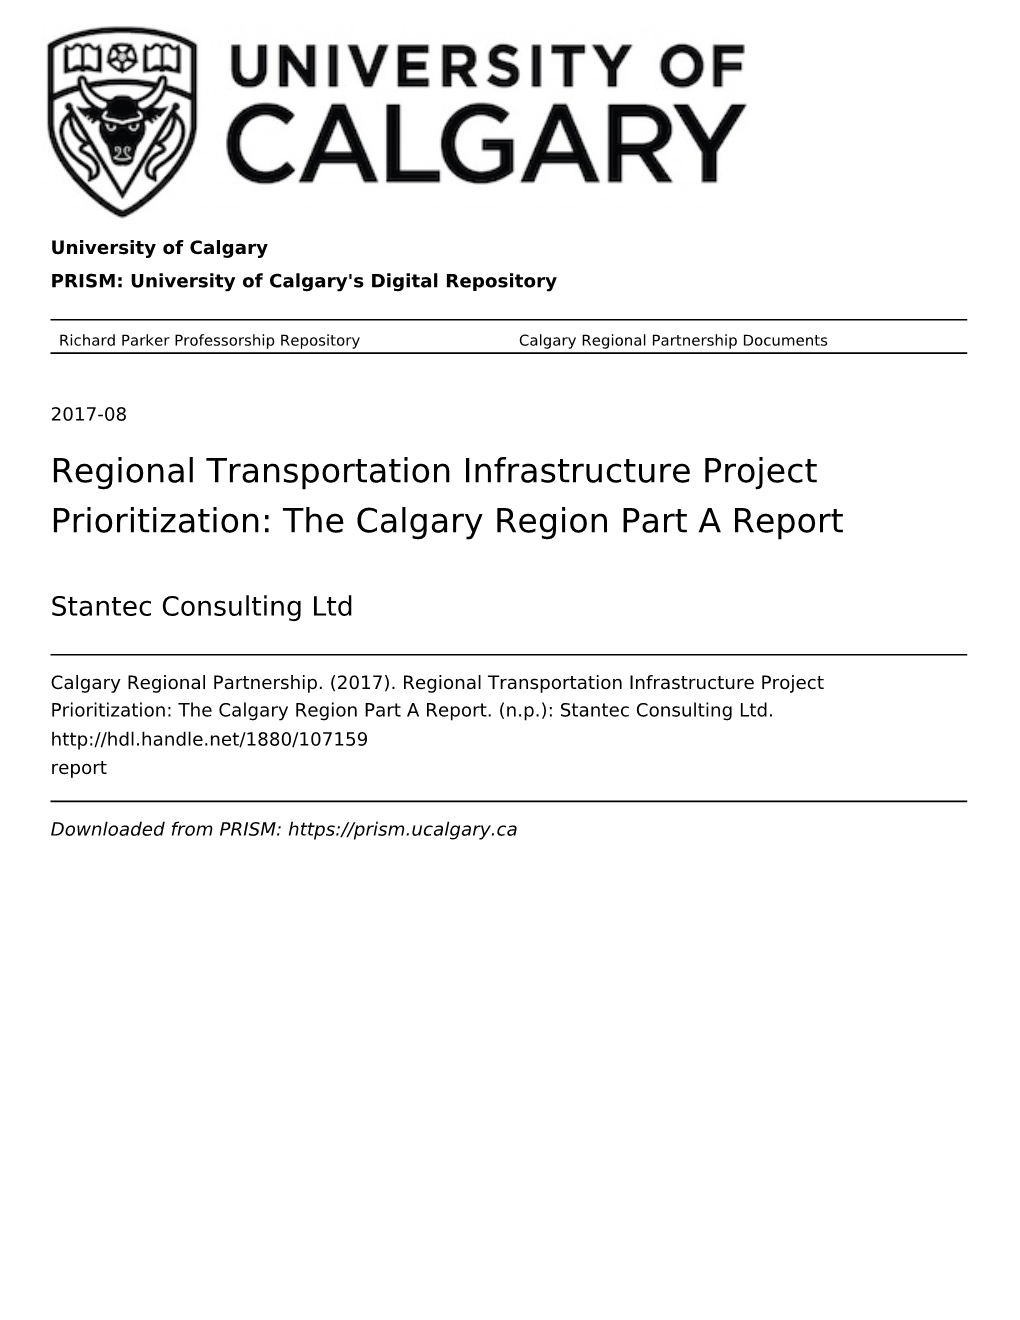 Regional Transportation Infrastructure Project Prioritization: the Calgary Region Part a Report